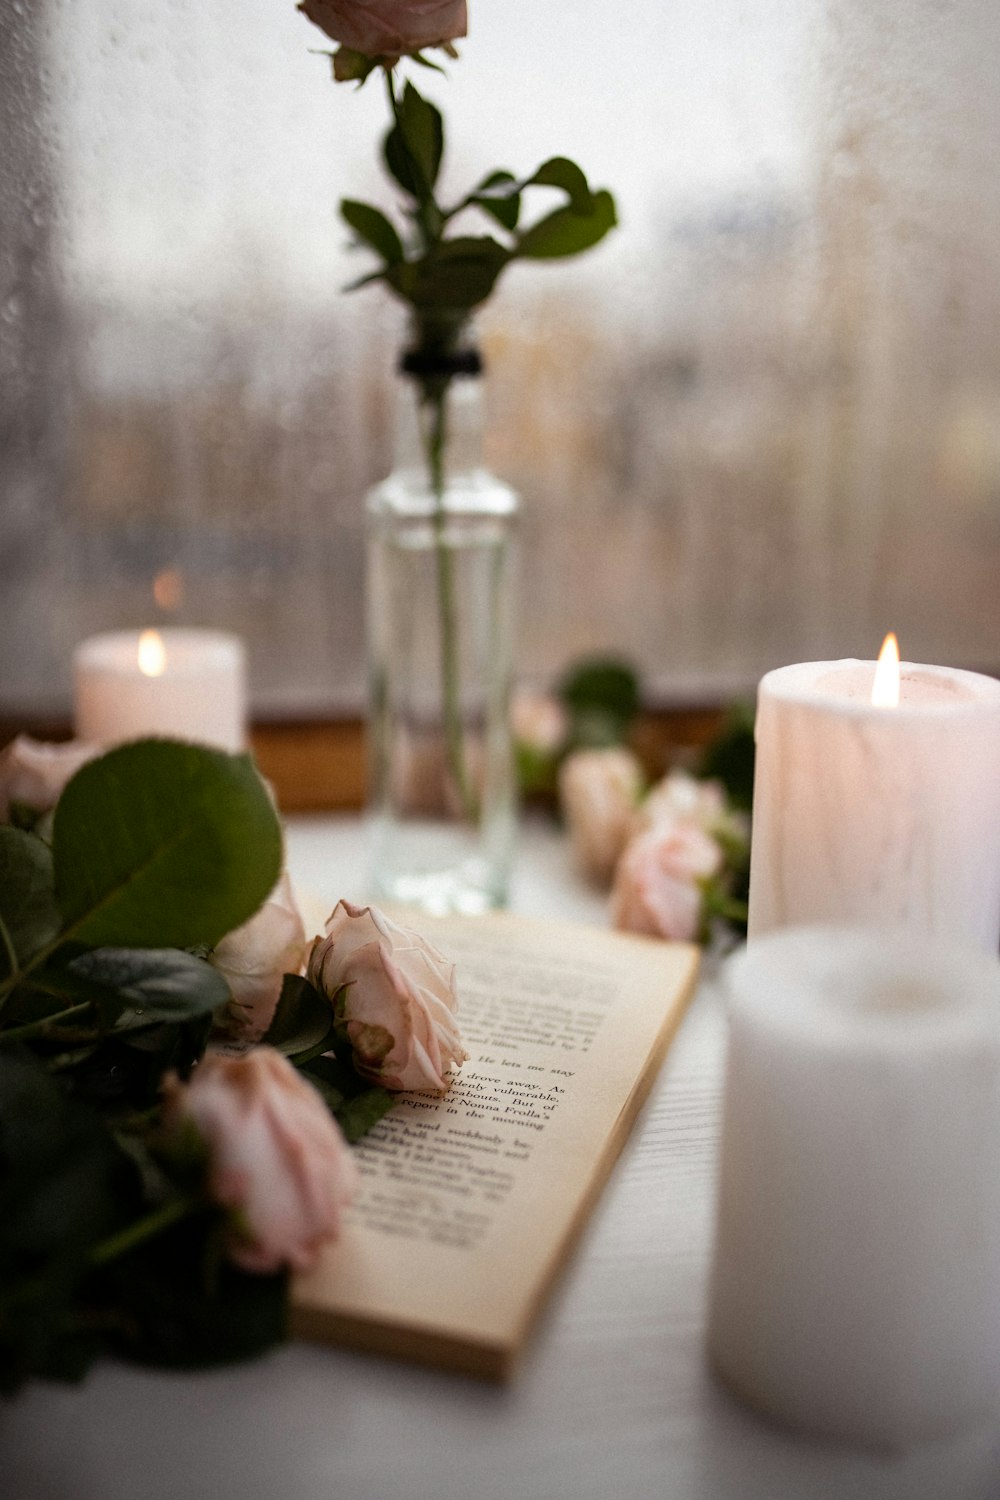 a table with a book and a vase of roses